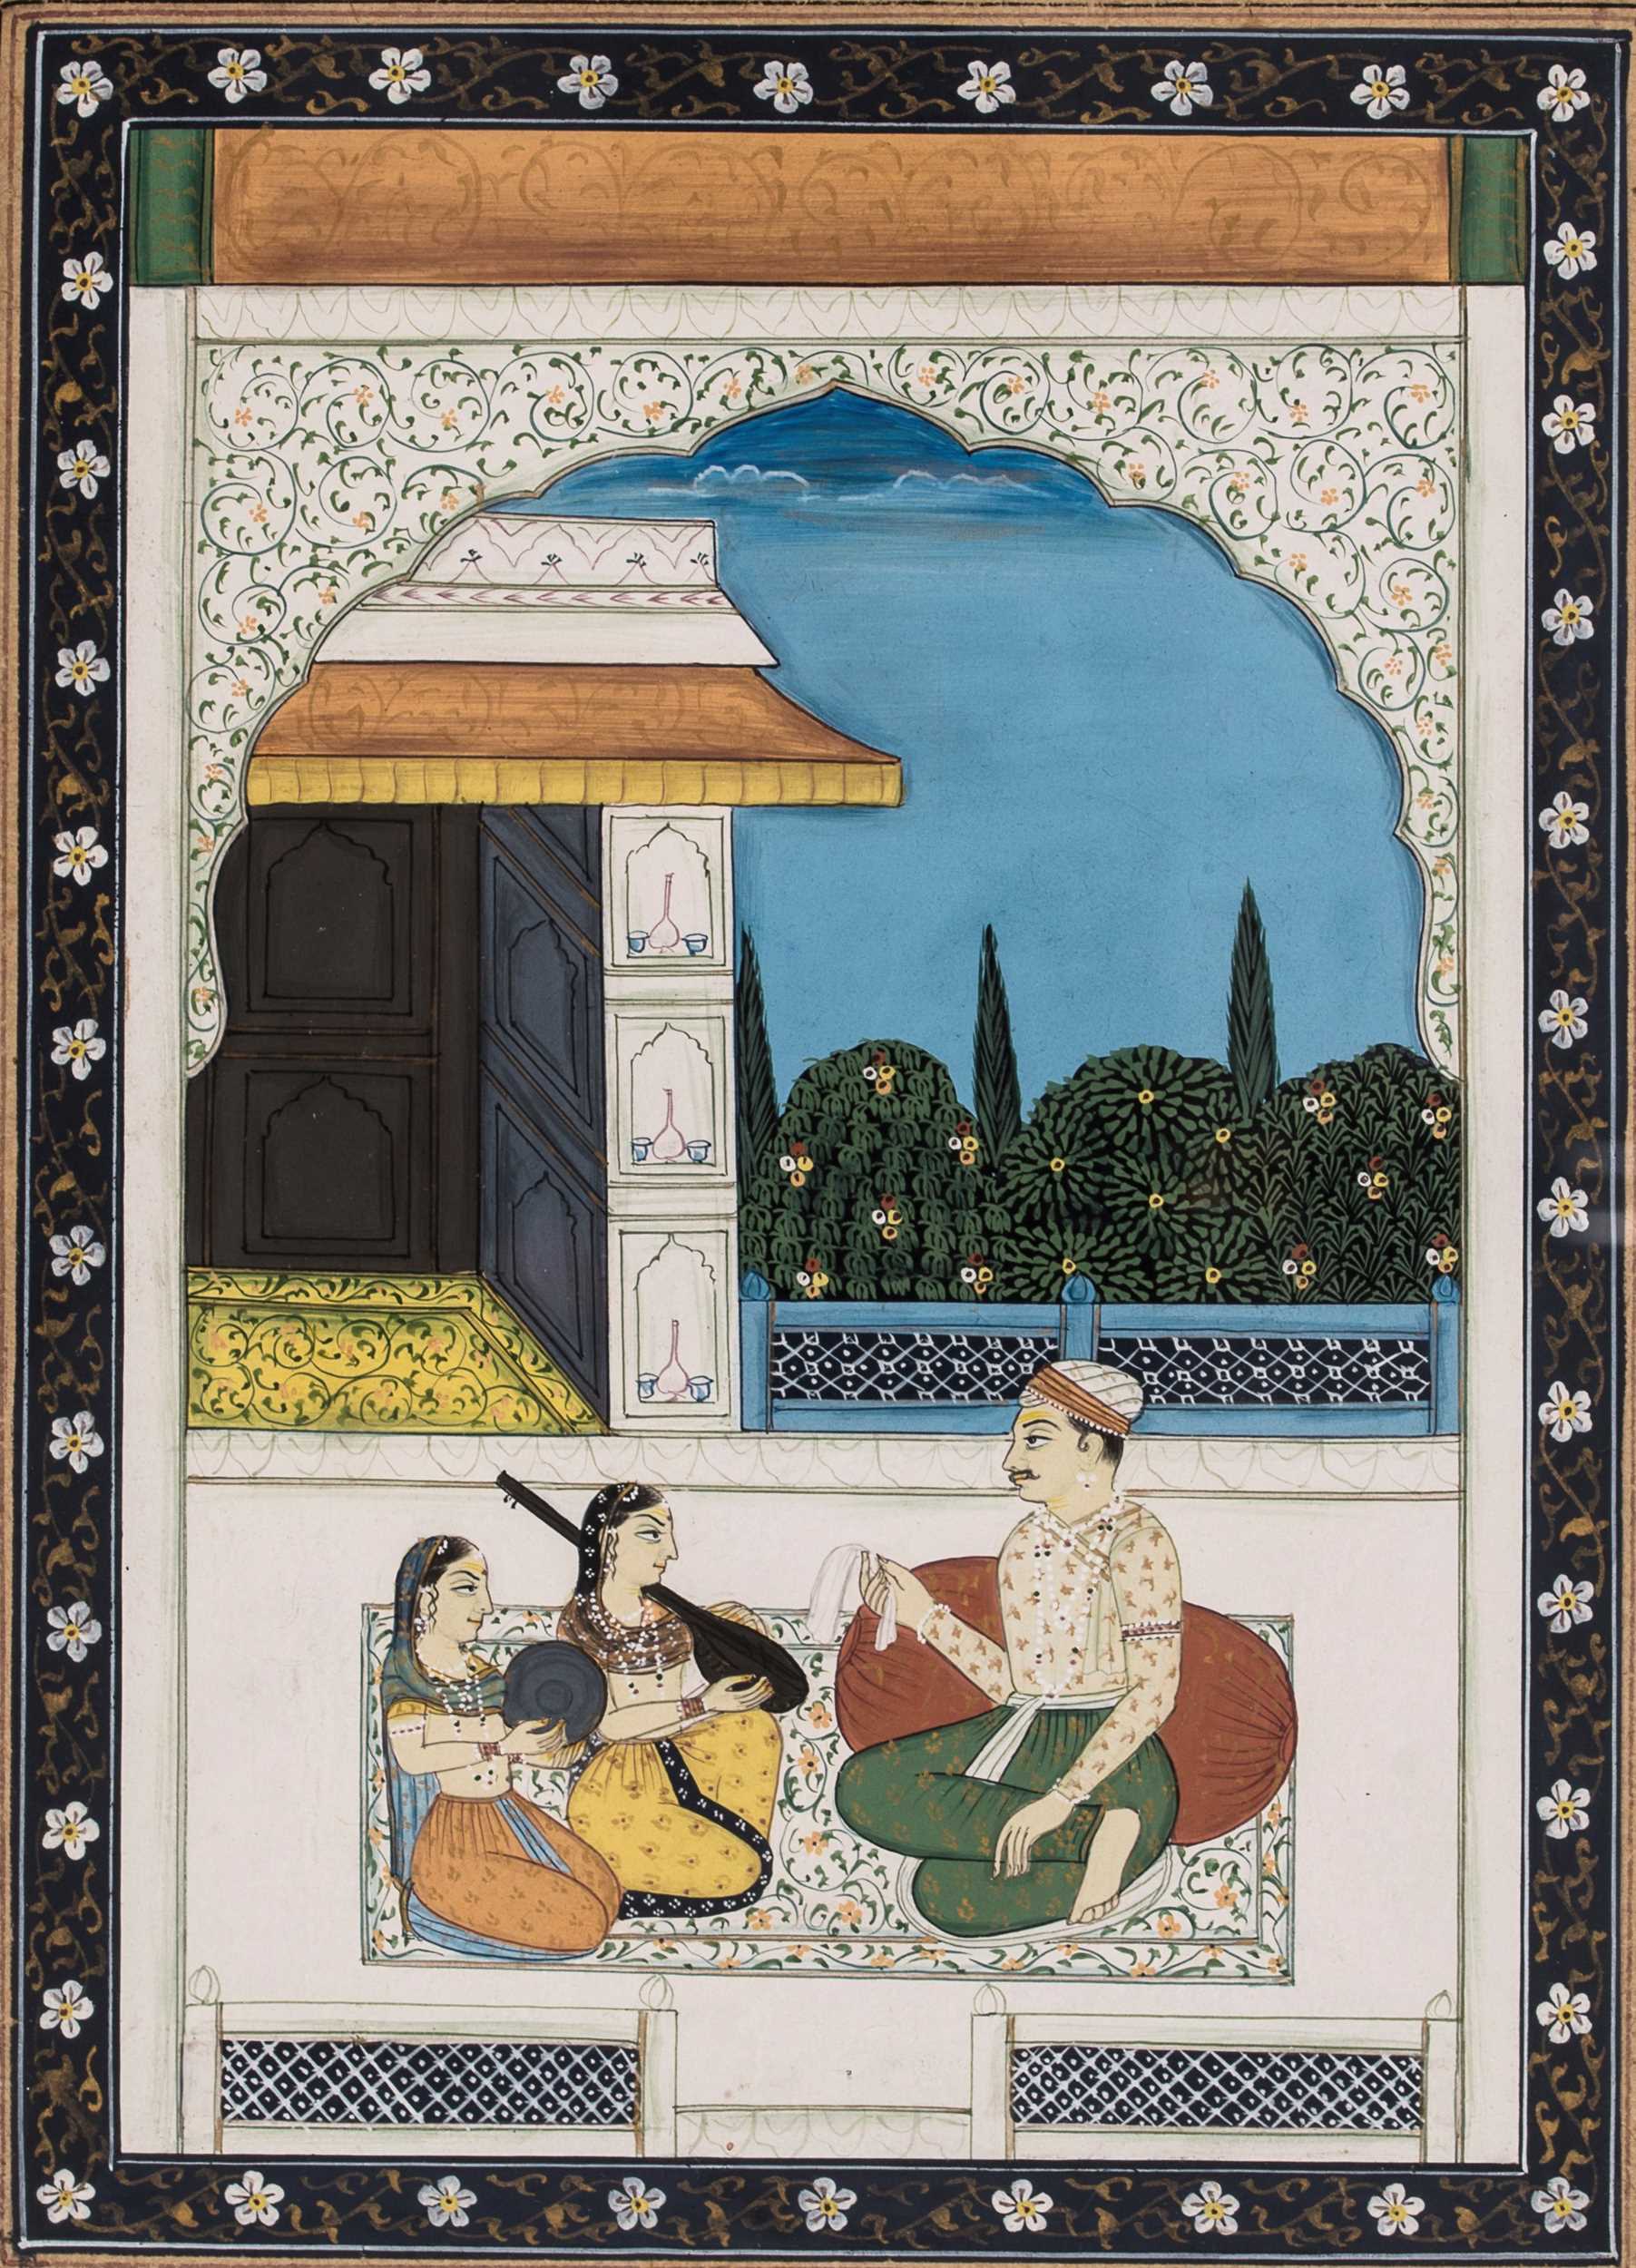 Lot 1227 - AN INDIAN MINIATURE PAINTING - 19th CENTURY